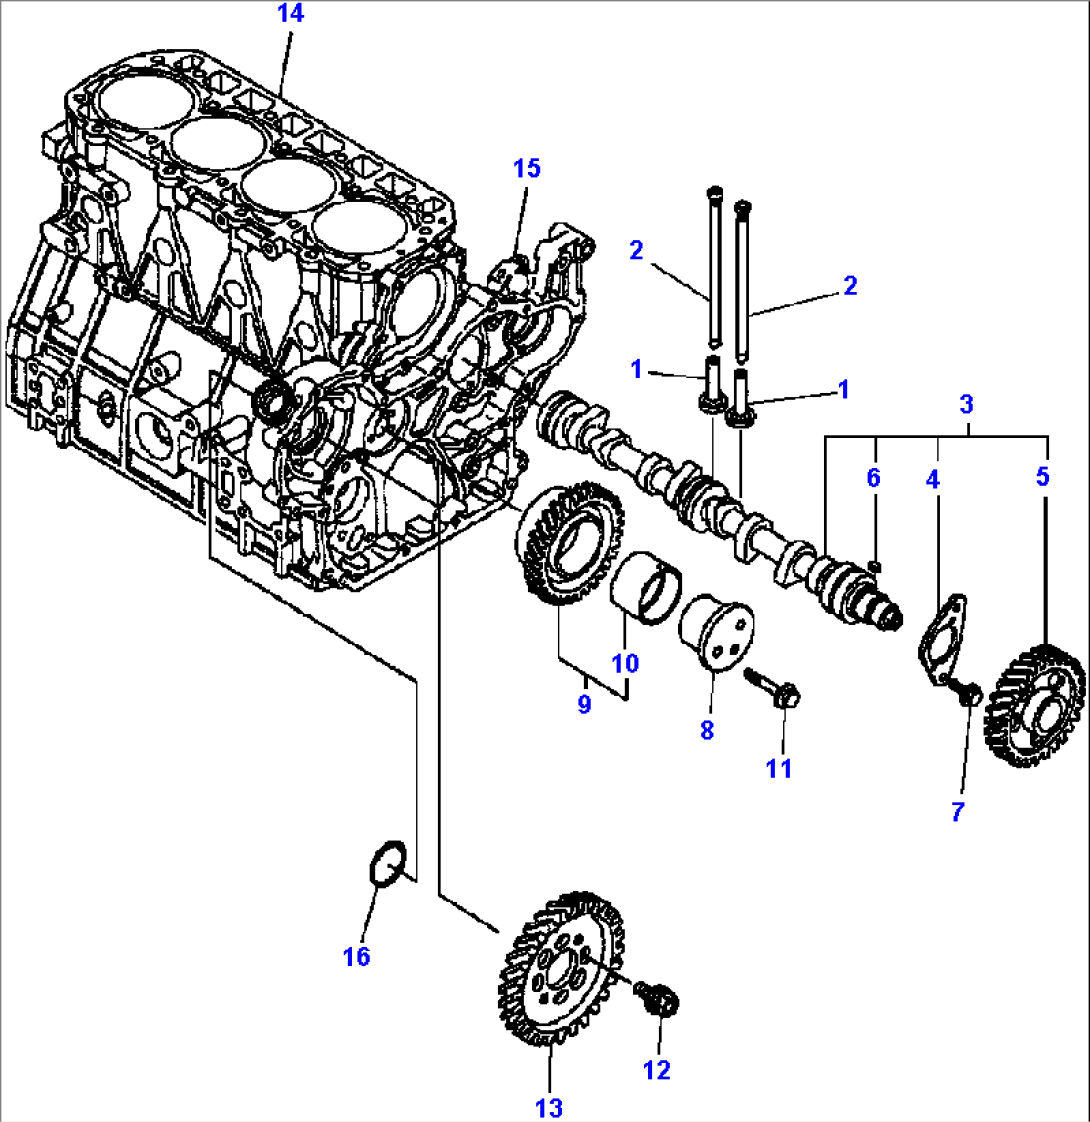 A0080-0231 CAMSHAFT AND DRIVING GEAR